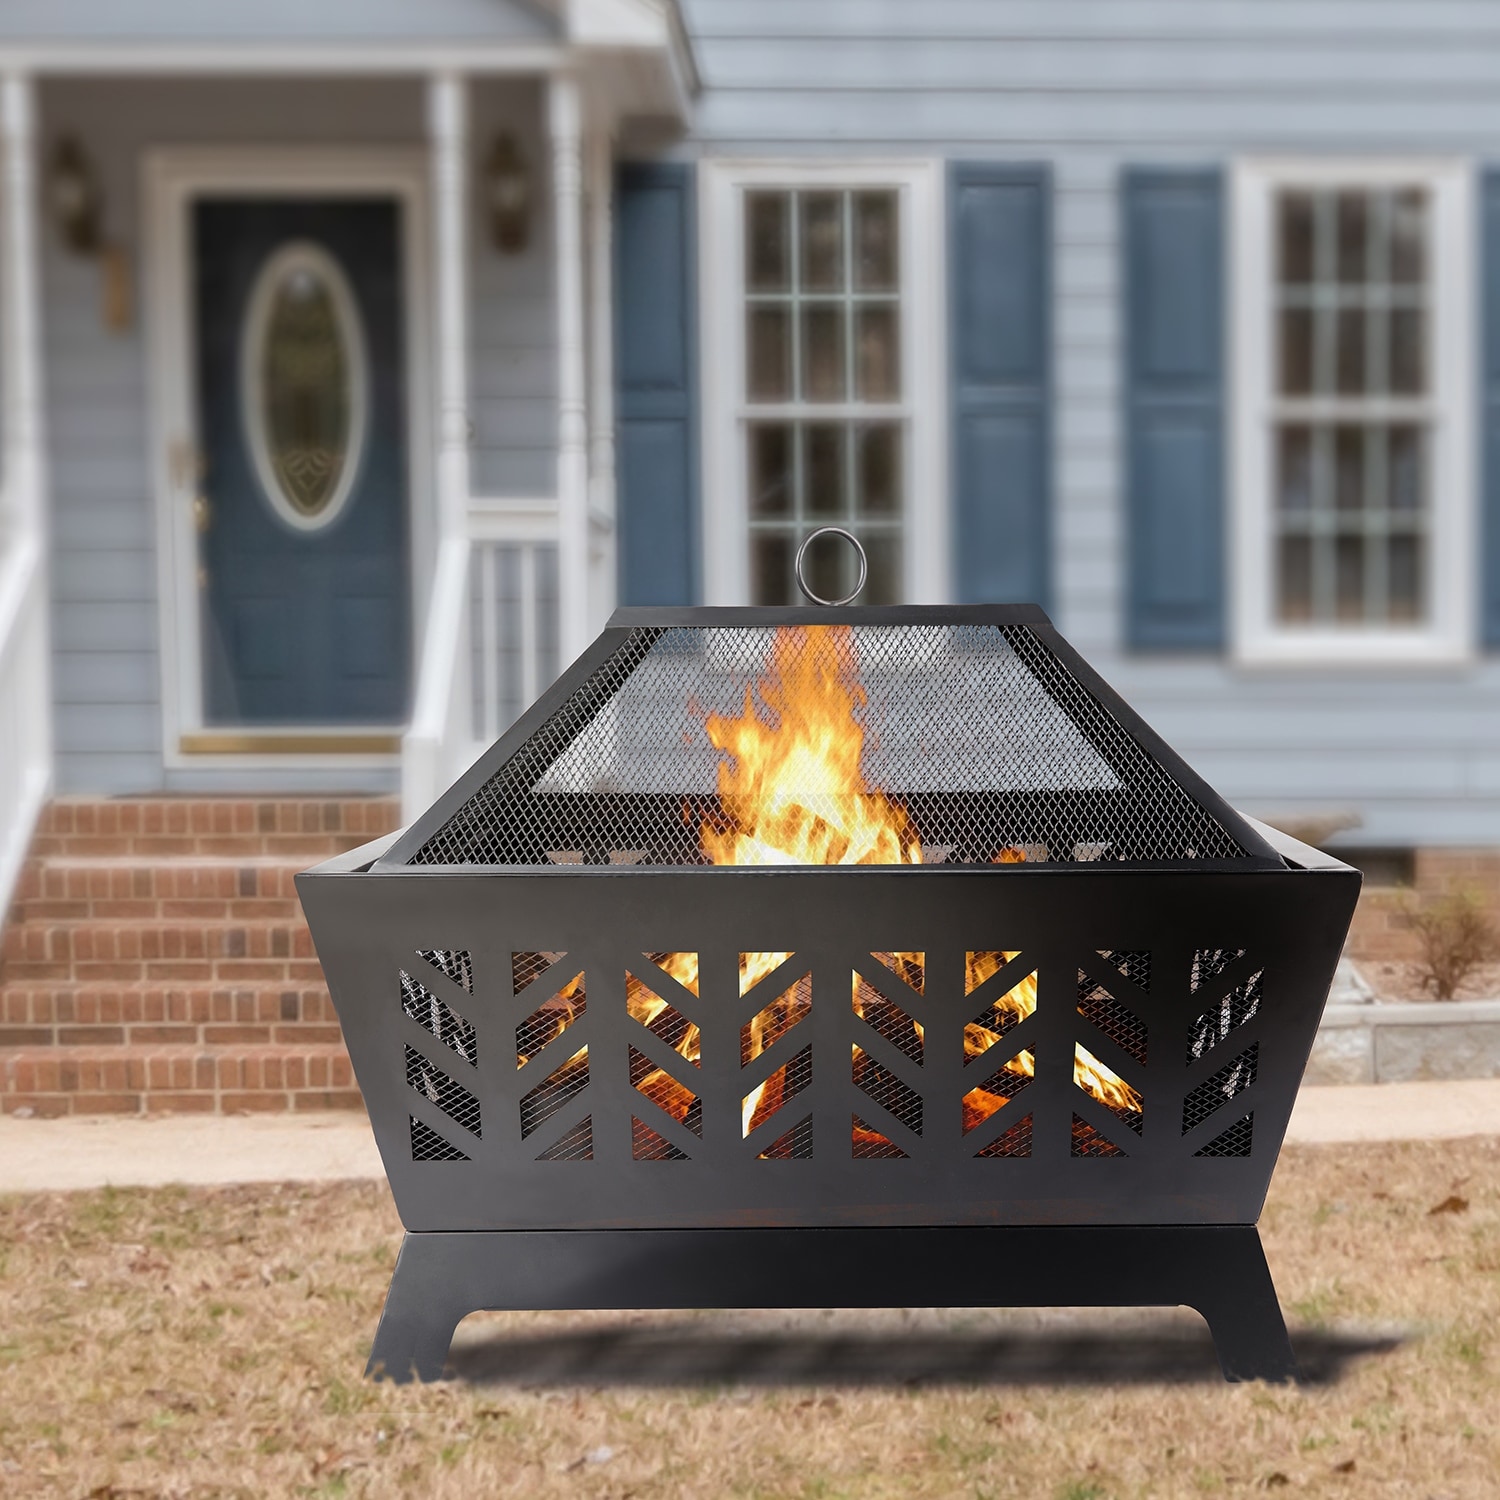 IGEMAN Square Iron Fire Pit with Top Ring Mesh Lid for Backyard Garden, 25.98L*25.98W*22.83H, 17.86LBS